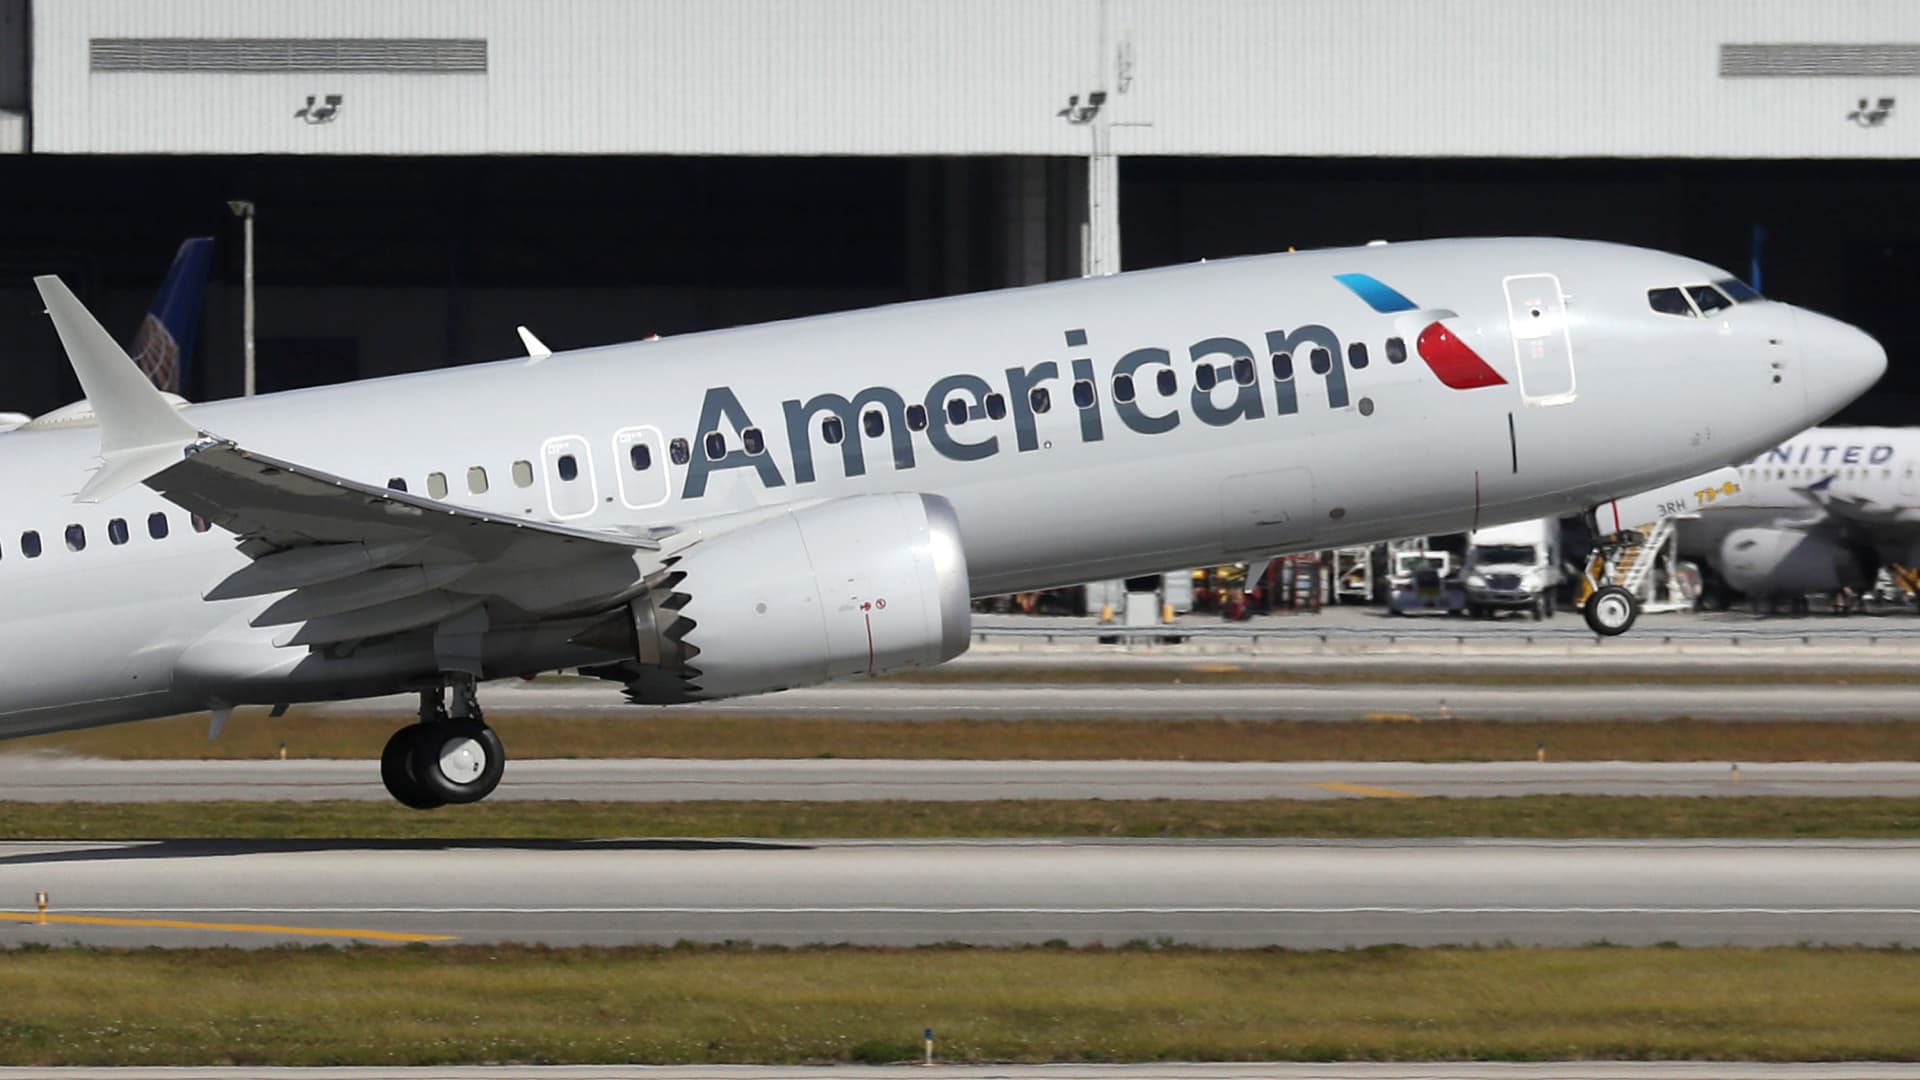 American Airlines flight 718, a Boeing 737 Max, takes of from Miami International Airport on its way to New York on December 29, 2020 in Miami, Florida.